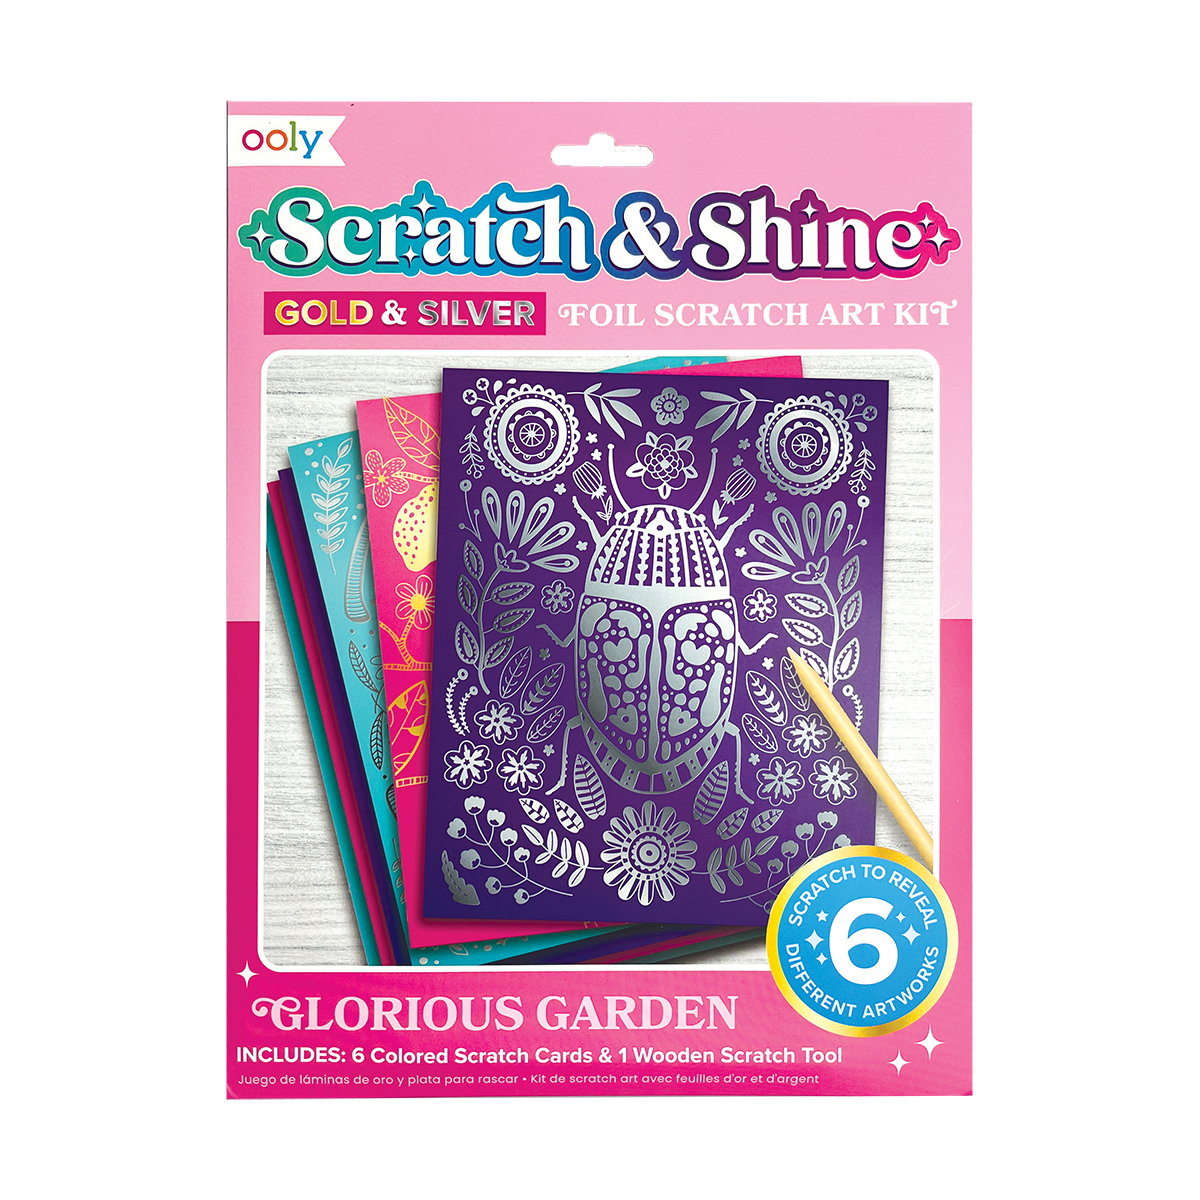 Scratch and Shine Foil Scratch Art Kit - Glorious Garden by OOLY